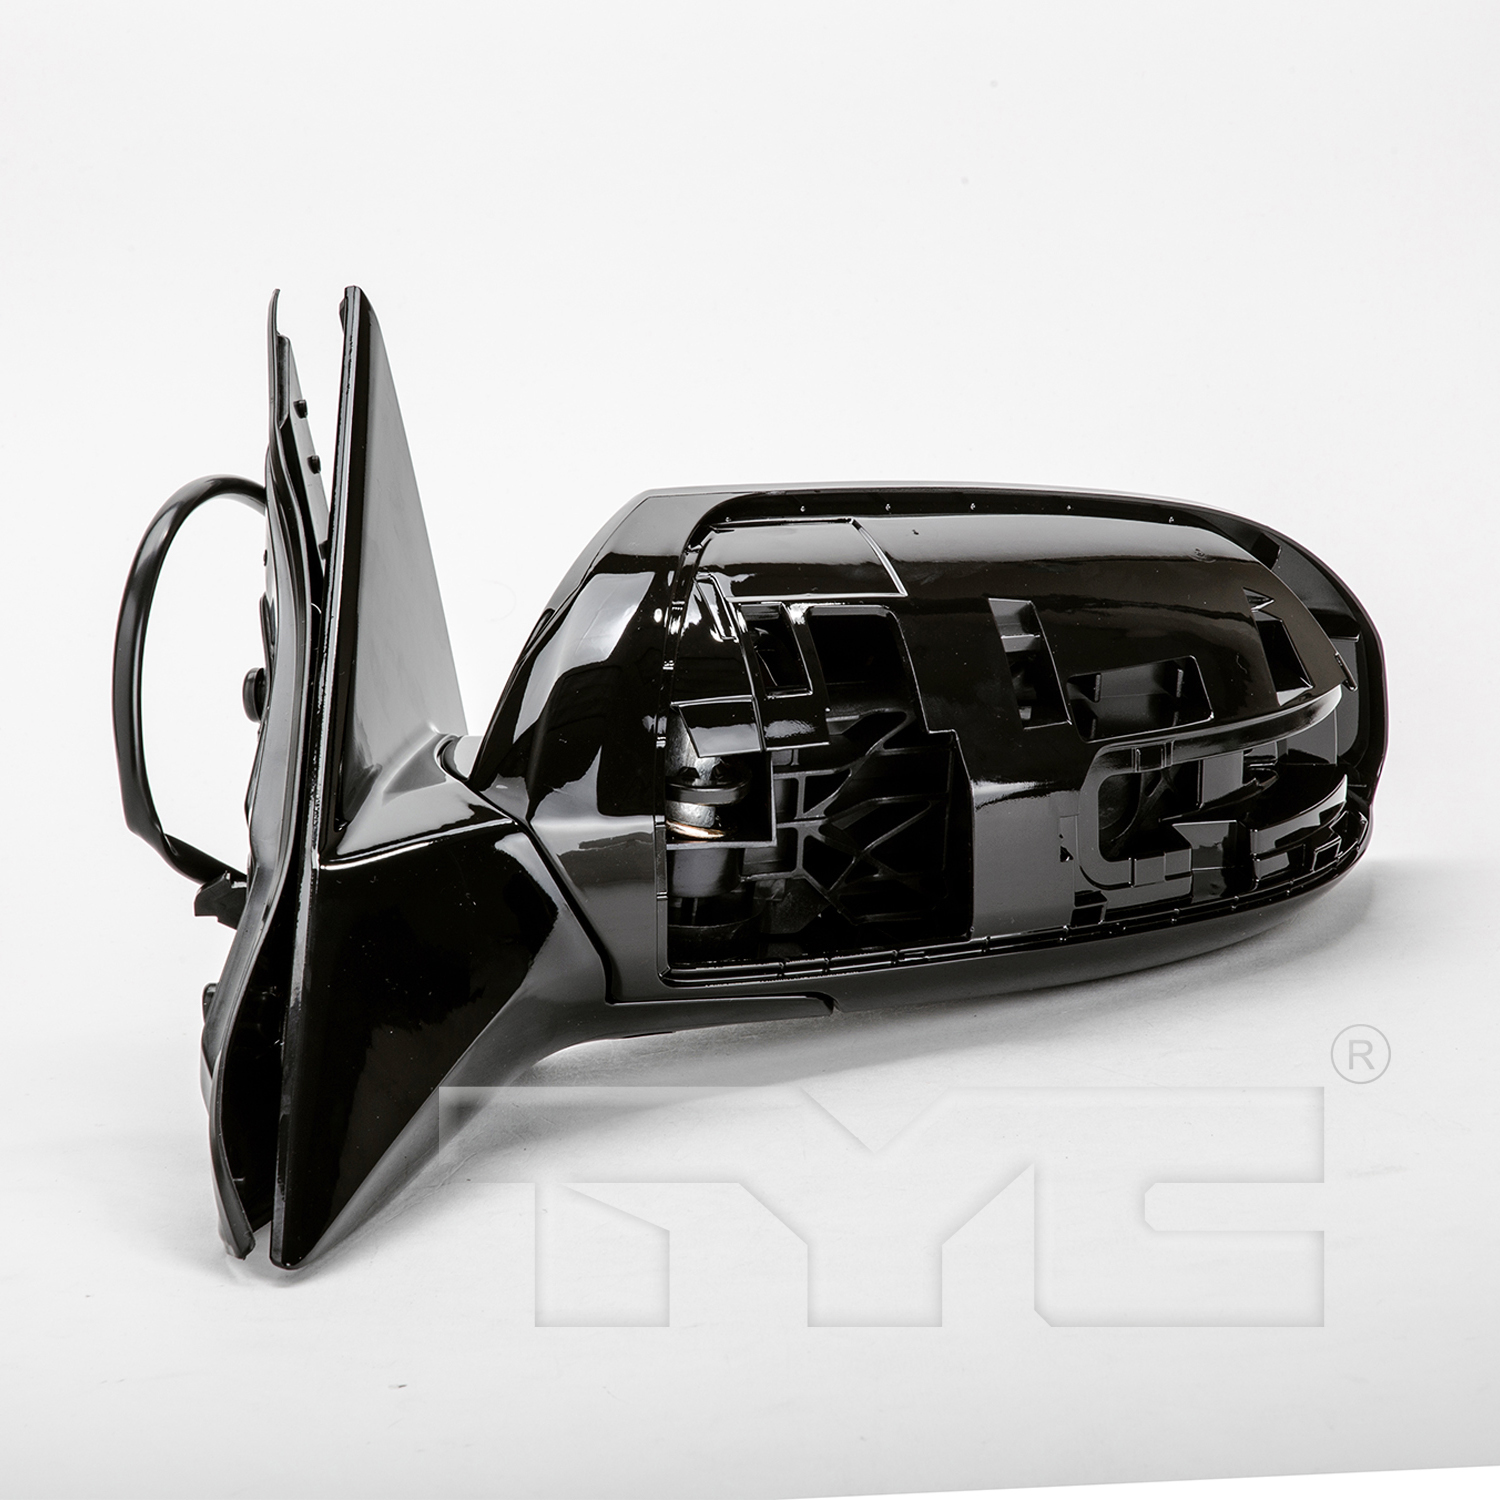 Aftermarket MIRRORS for NISSAN - MAXIMA, MAXIMA,09-14,LT Mirror outside rear view